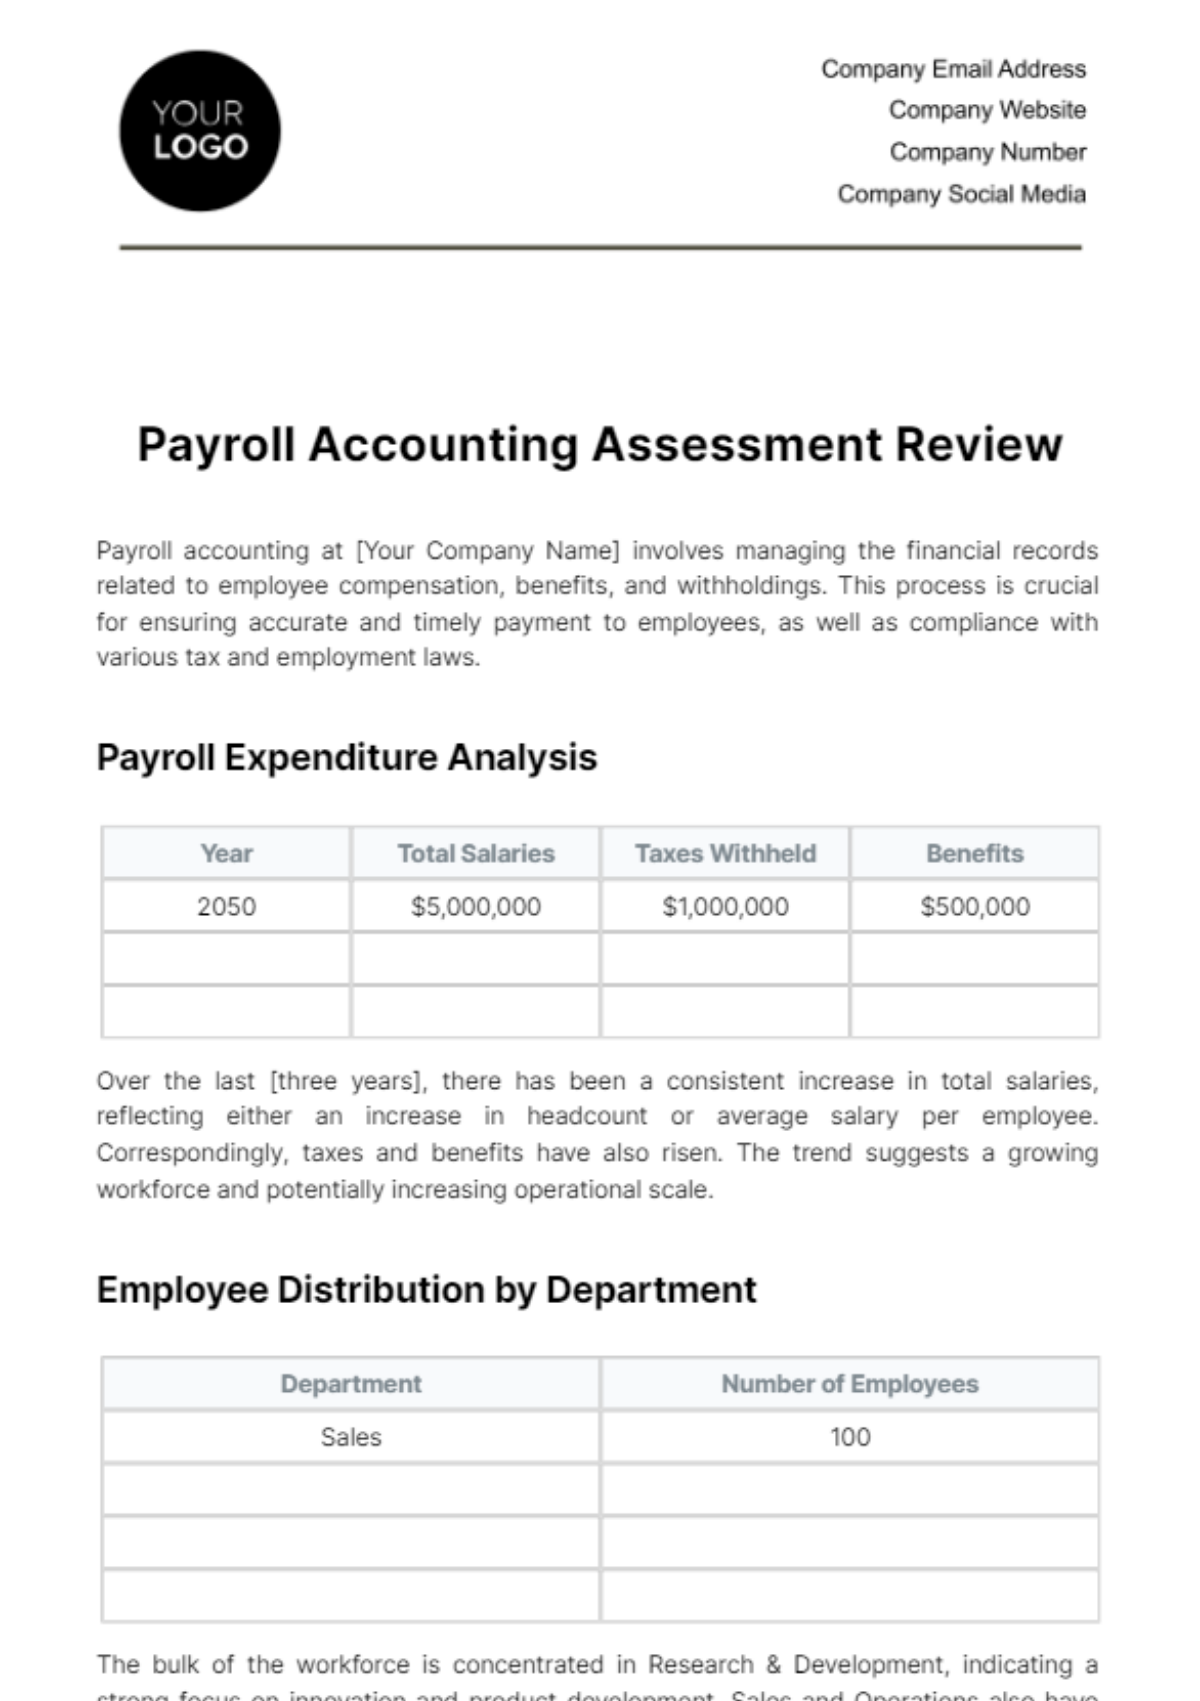 Payroll Accounting Assessment Review Template